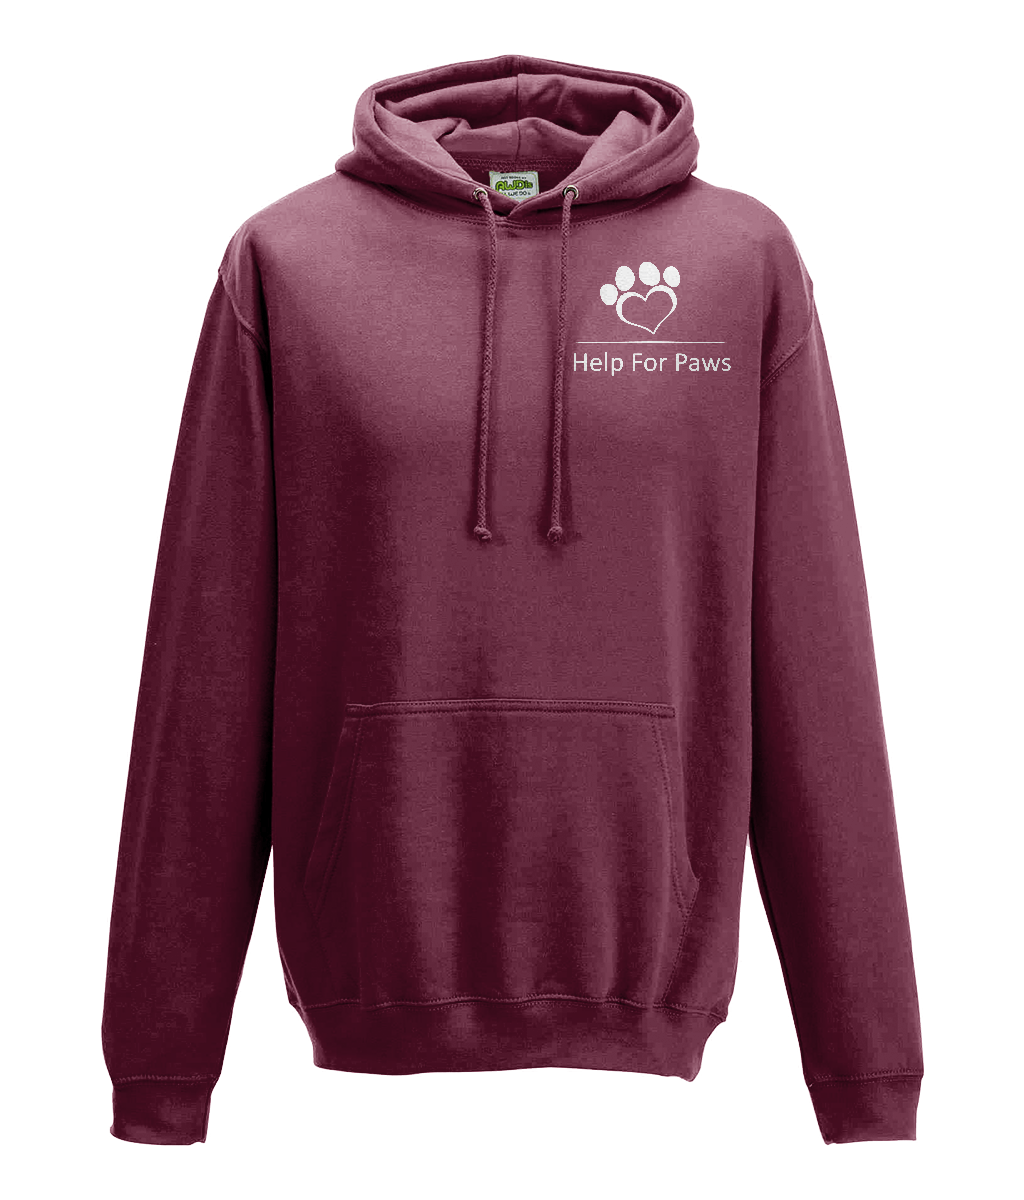 Suggested Products - Help For Paws Burgundy Hoodie